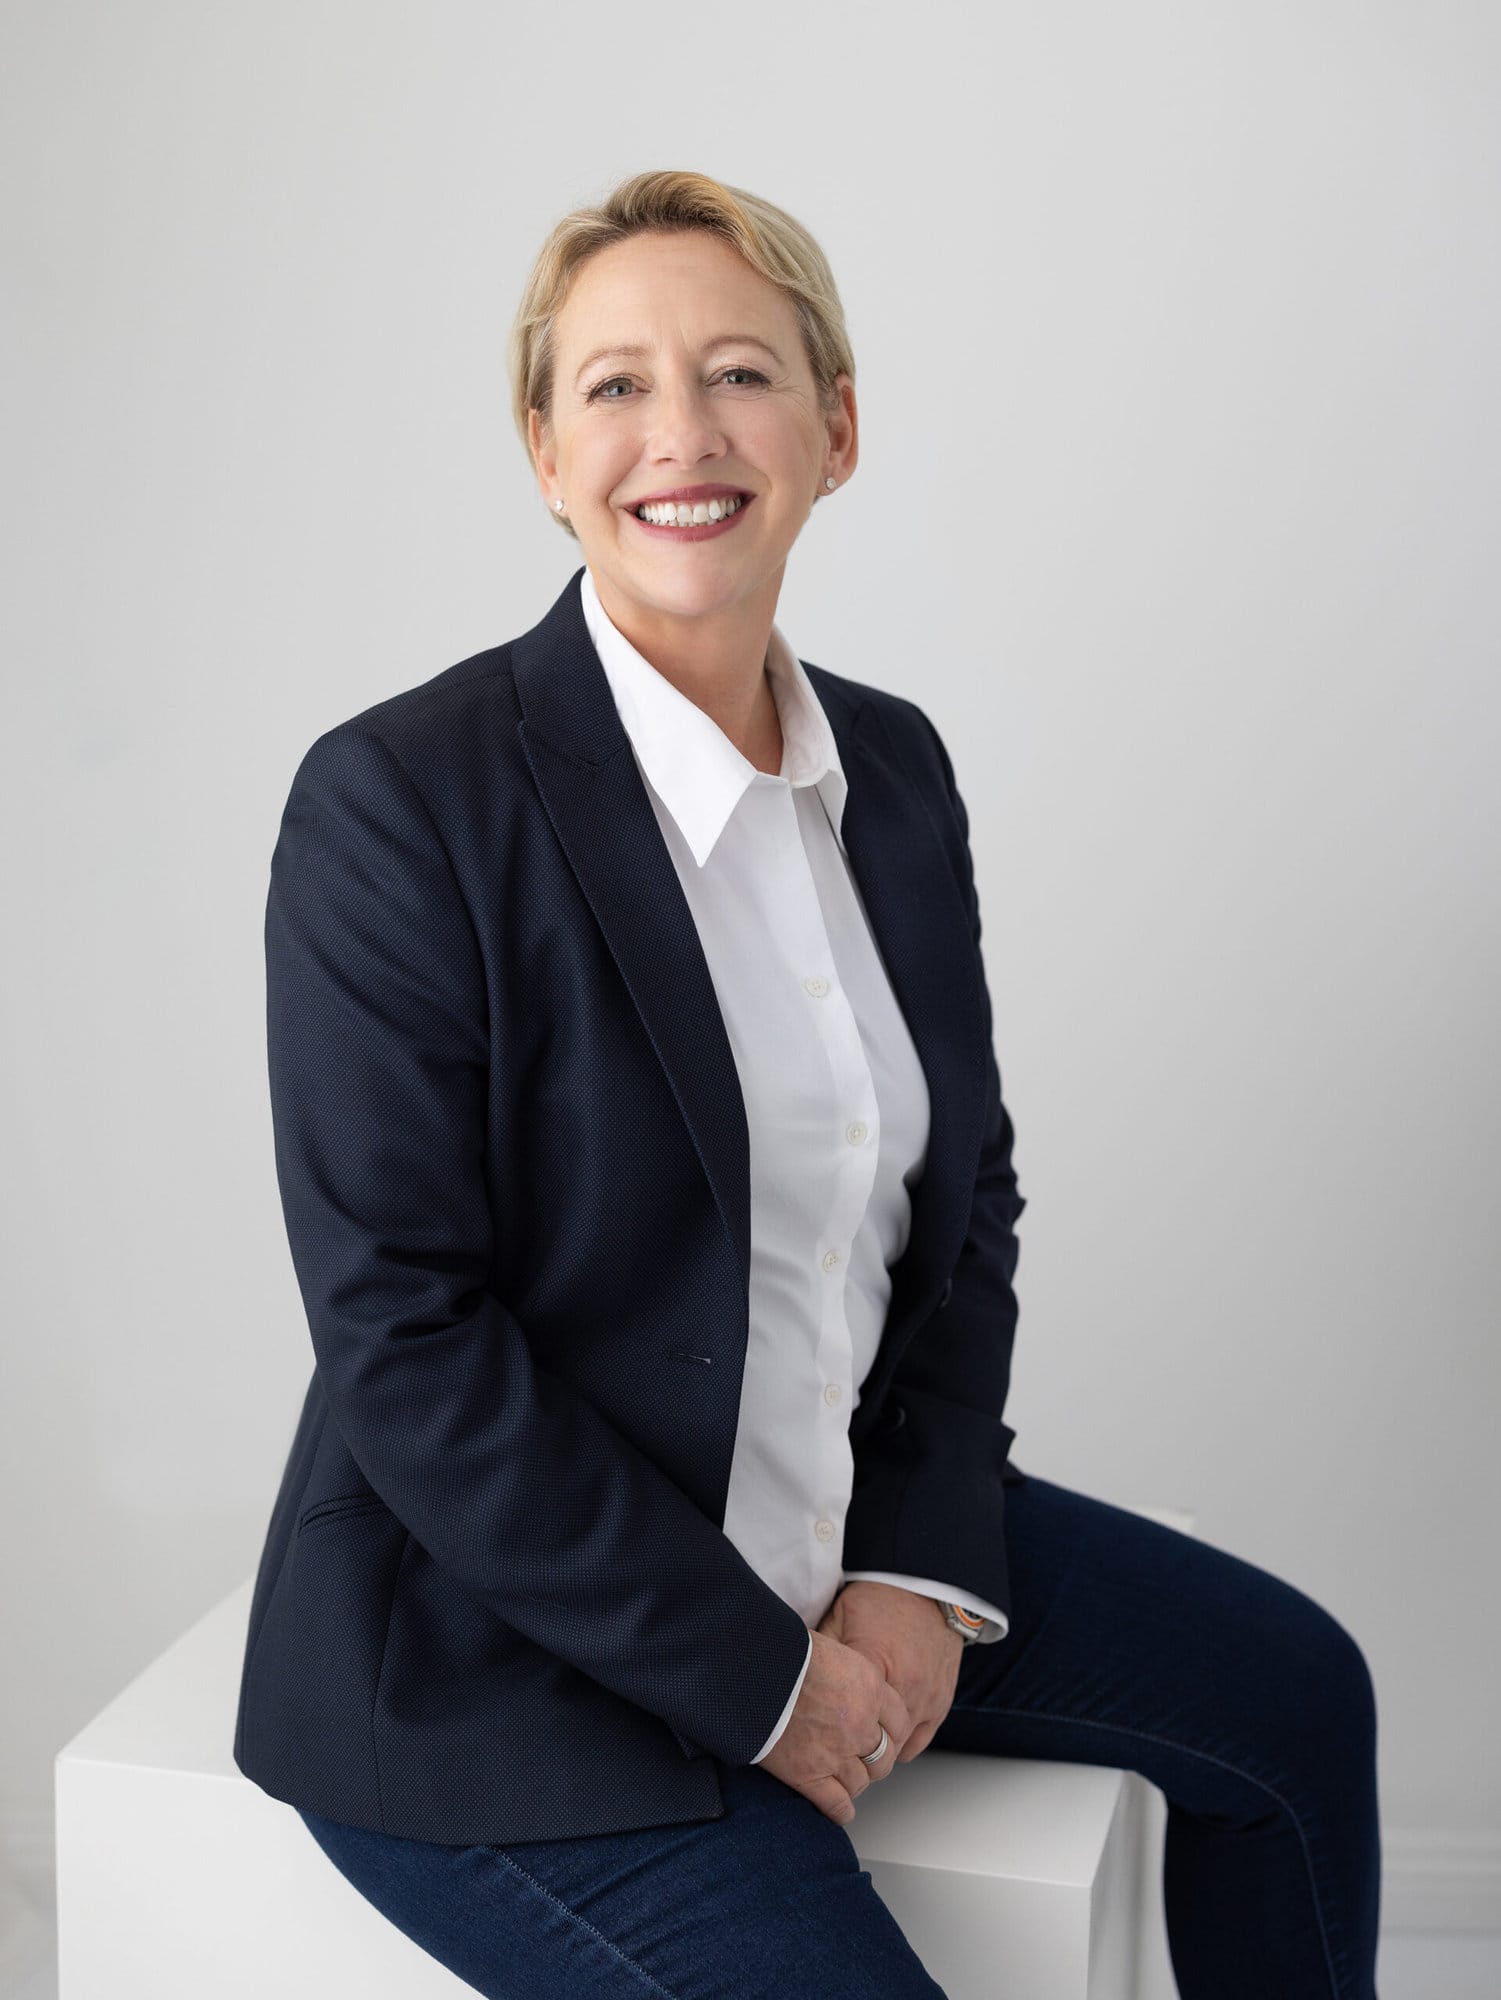 Personal branding portrait of a Nutritionalist and life coach smiling and wearing a navy suit